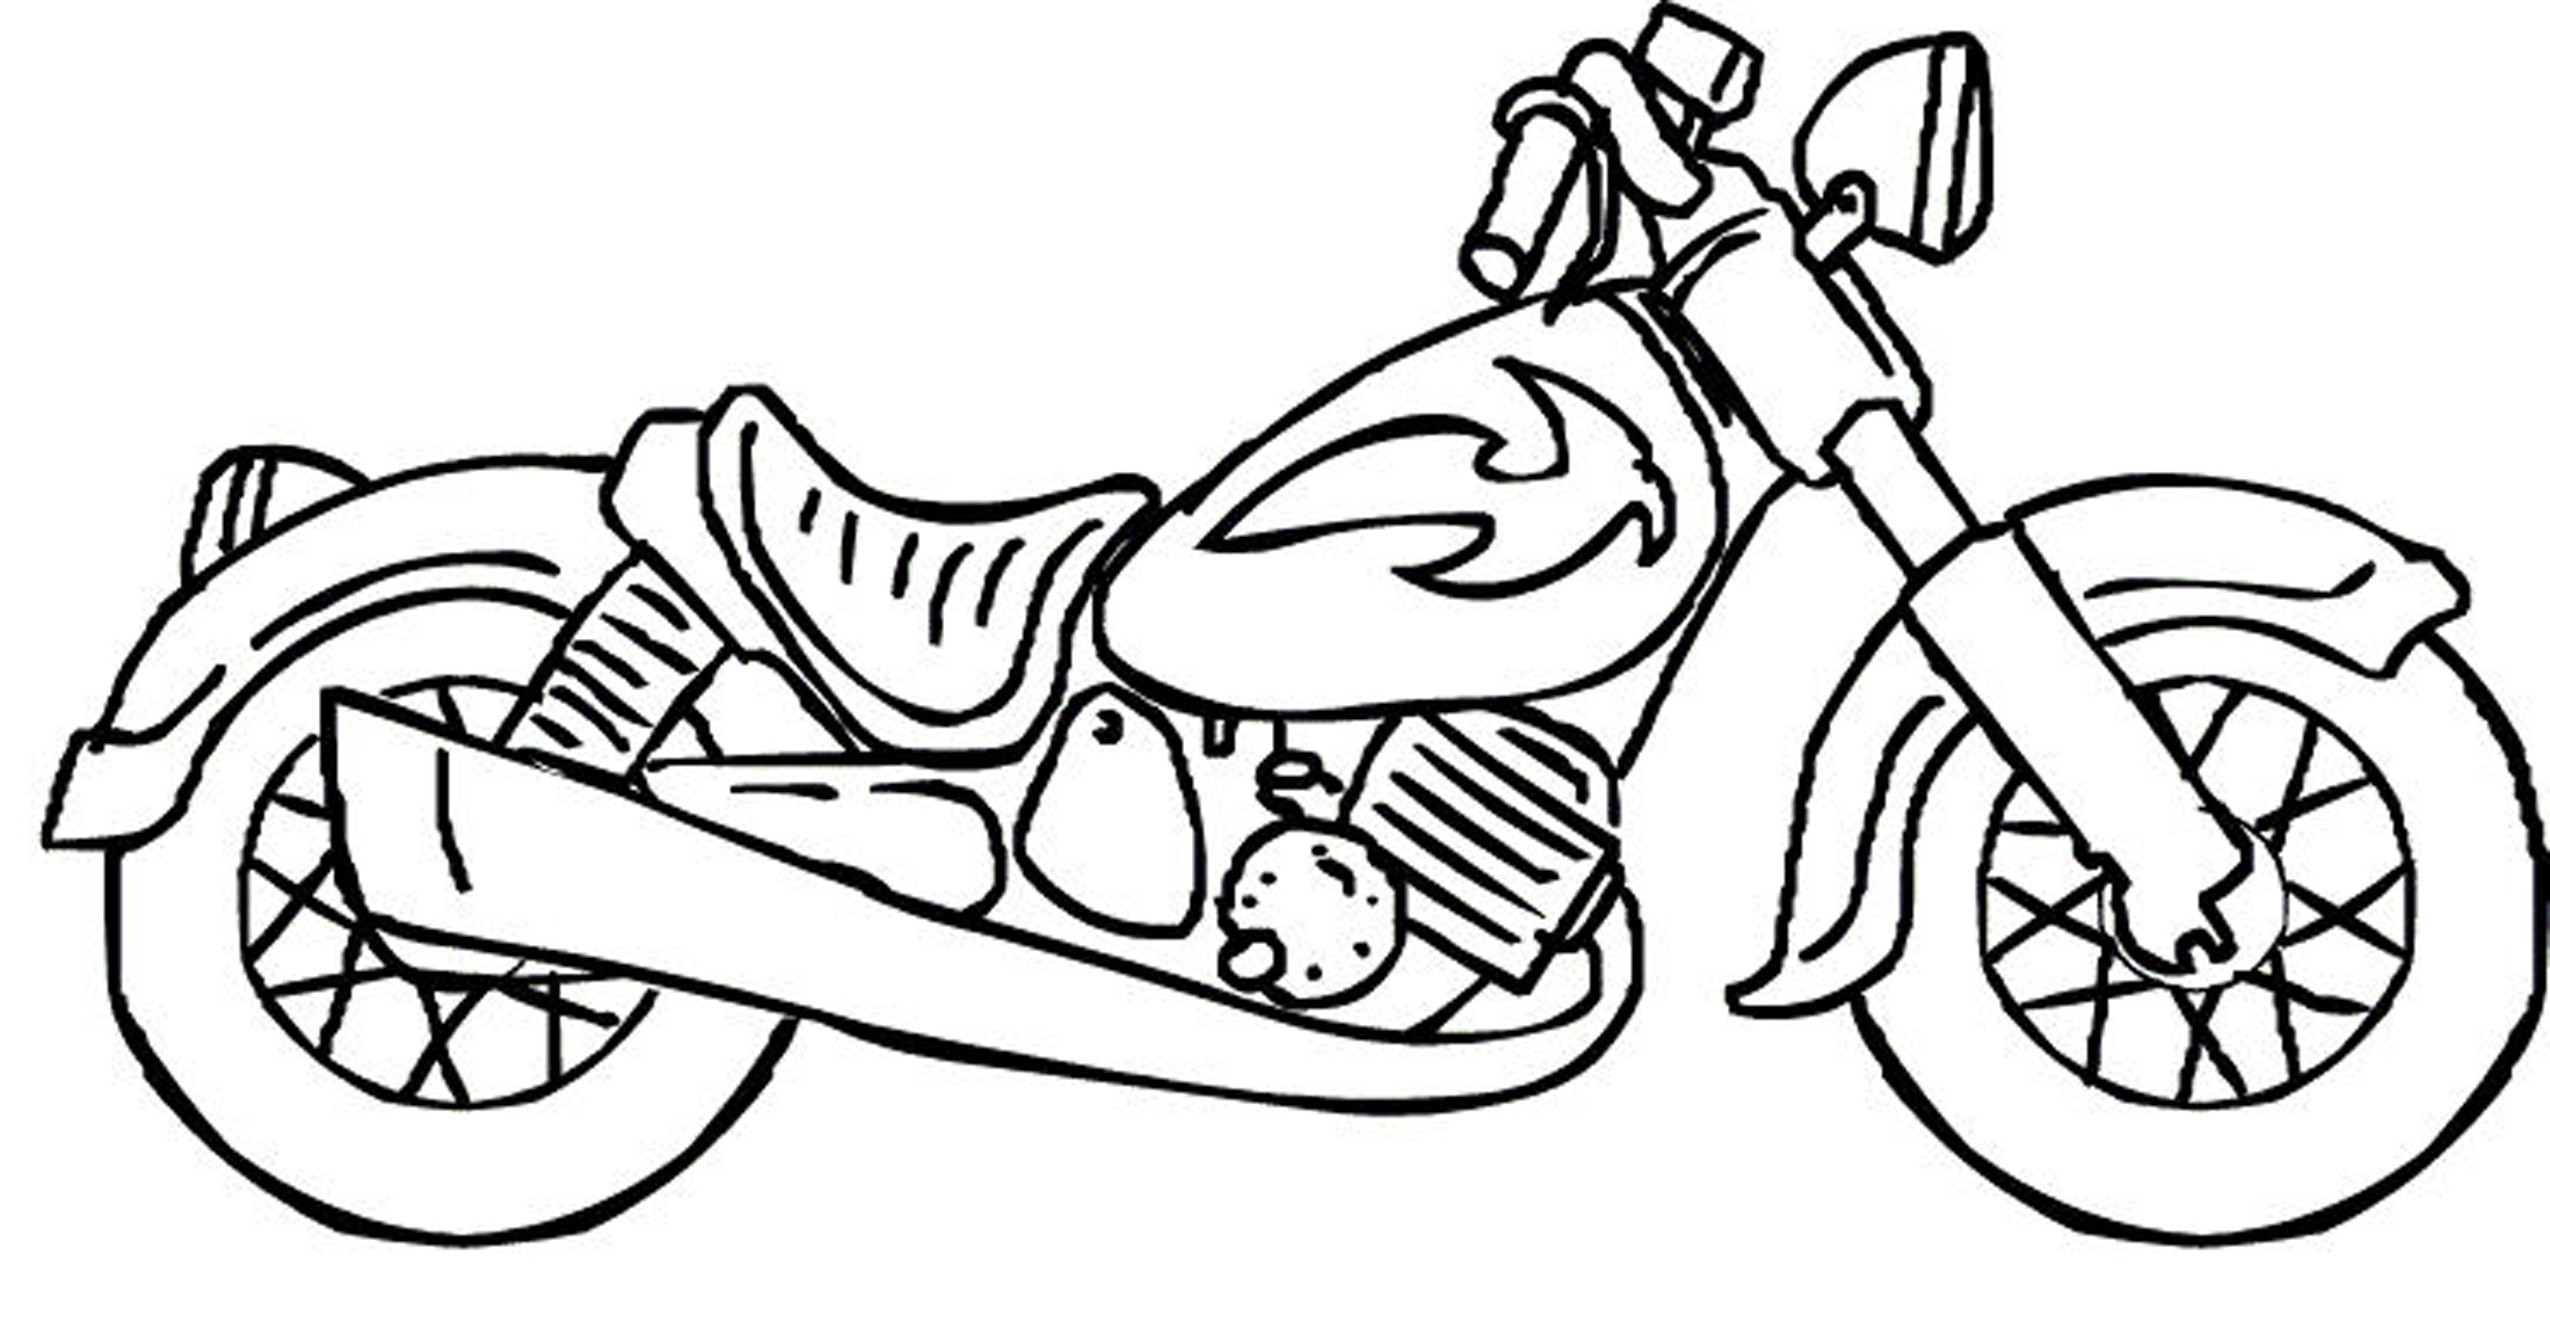 Coloring Pages Printable For Boys
 Printable Coloring Pages For Boys